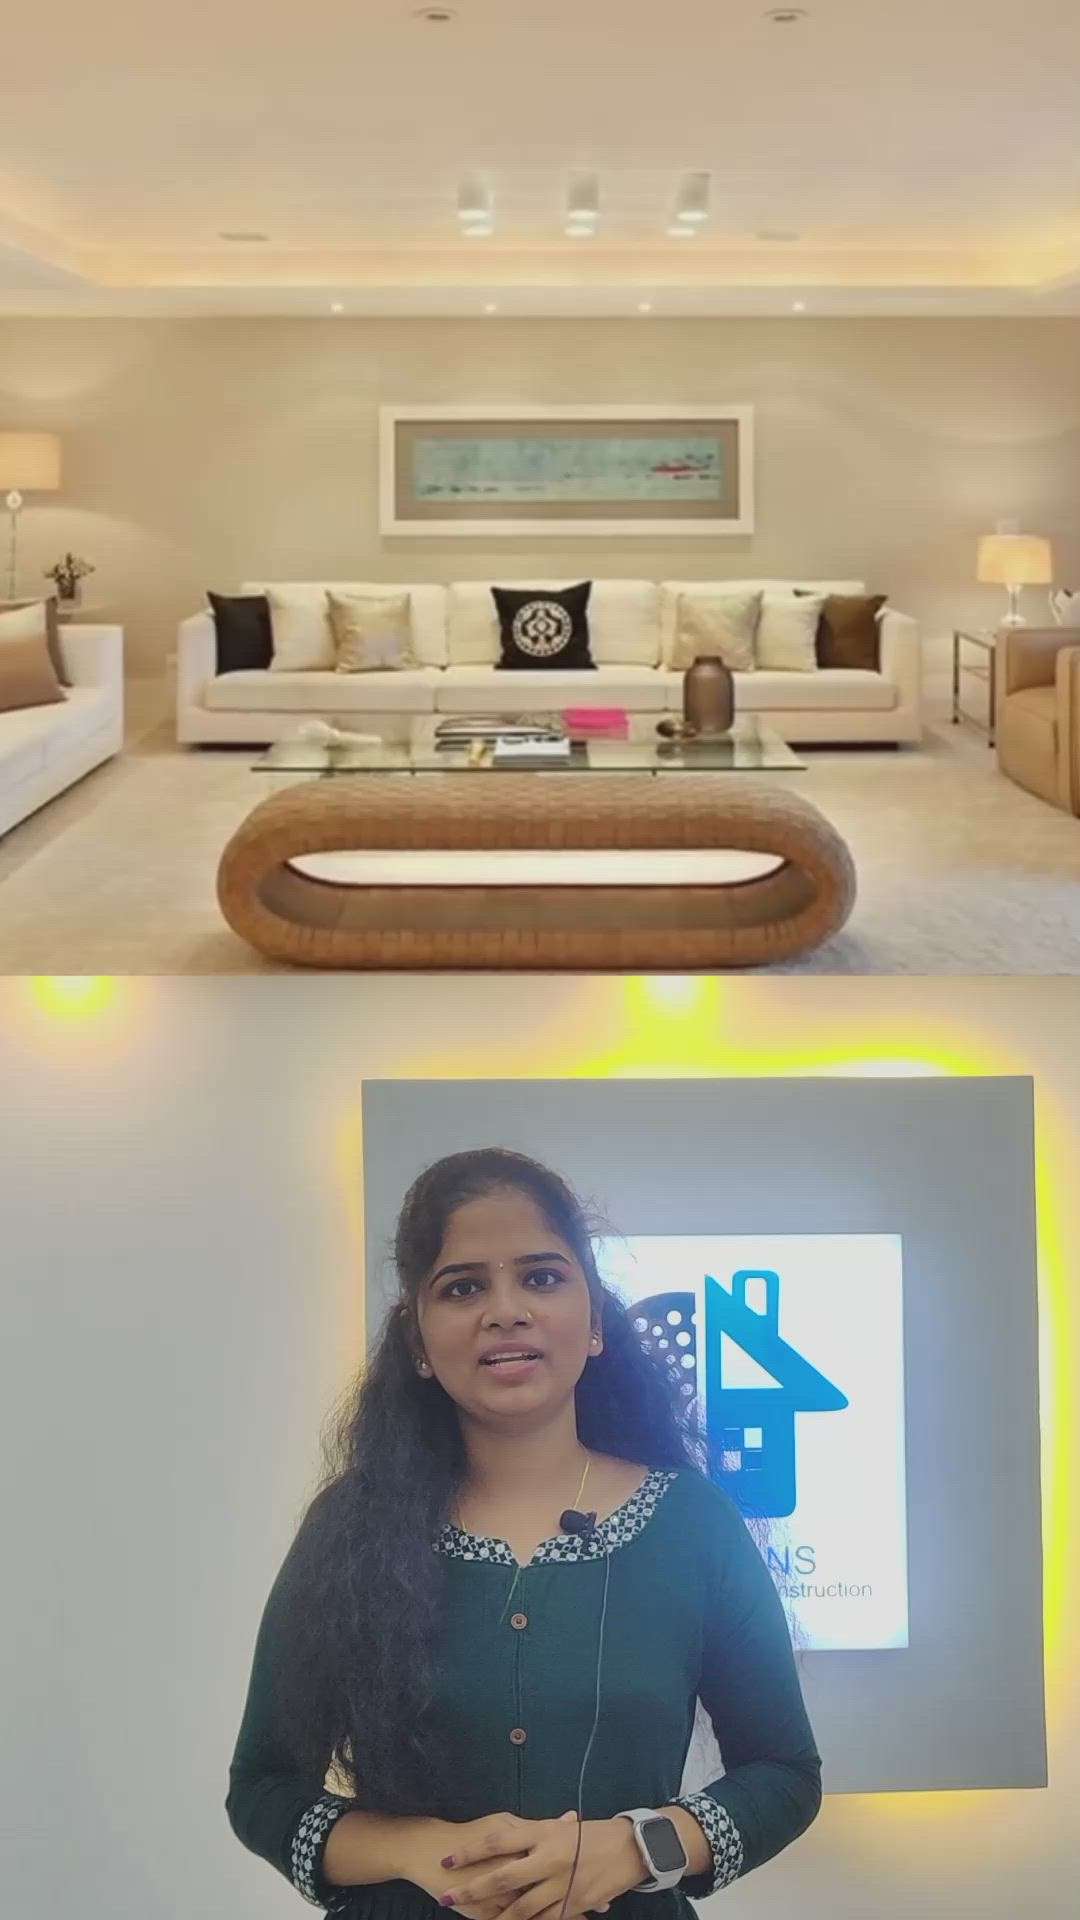 Guest കൾ വരുമ്പോൾ സ്വീകരിക്കാനൊരിടം | About Guest Living Room | IQ Designs ❤️😊

Contact - 8848721023,9074476095 

#construction #architecture #design #building #interiordesign #renovation #engineering #contractor #home #realestate #concrete #constructionlife #builder #interior #civilengineering #homedecor #architect #civil #heavyequipment #homeimprovement #house #constructionsite #homedesign #carpentry #tools #art #engineer #workingtym